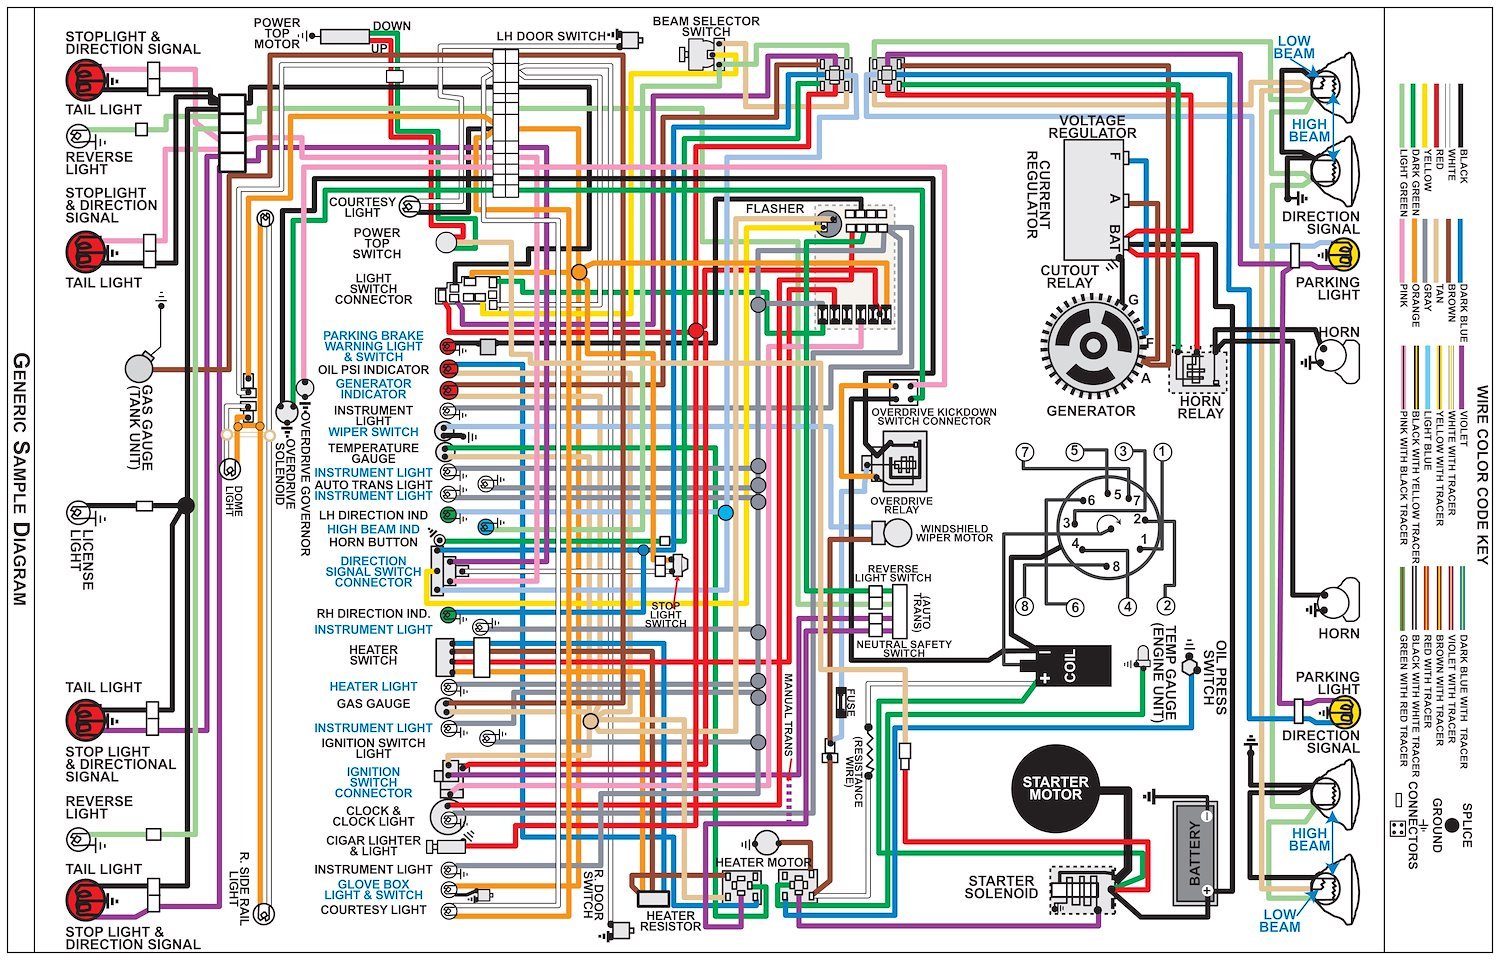 Wiring Diagram for 1982 GMC Blazer, Jimmy, Pickup, Suburban - 6 & 8 Cyl. Engines (Non Diesel), 11 in. x 17 in., Laminate